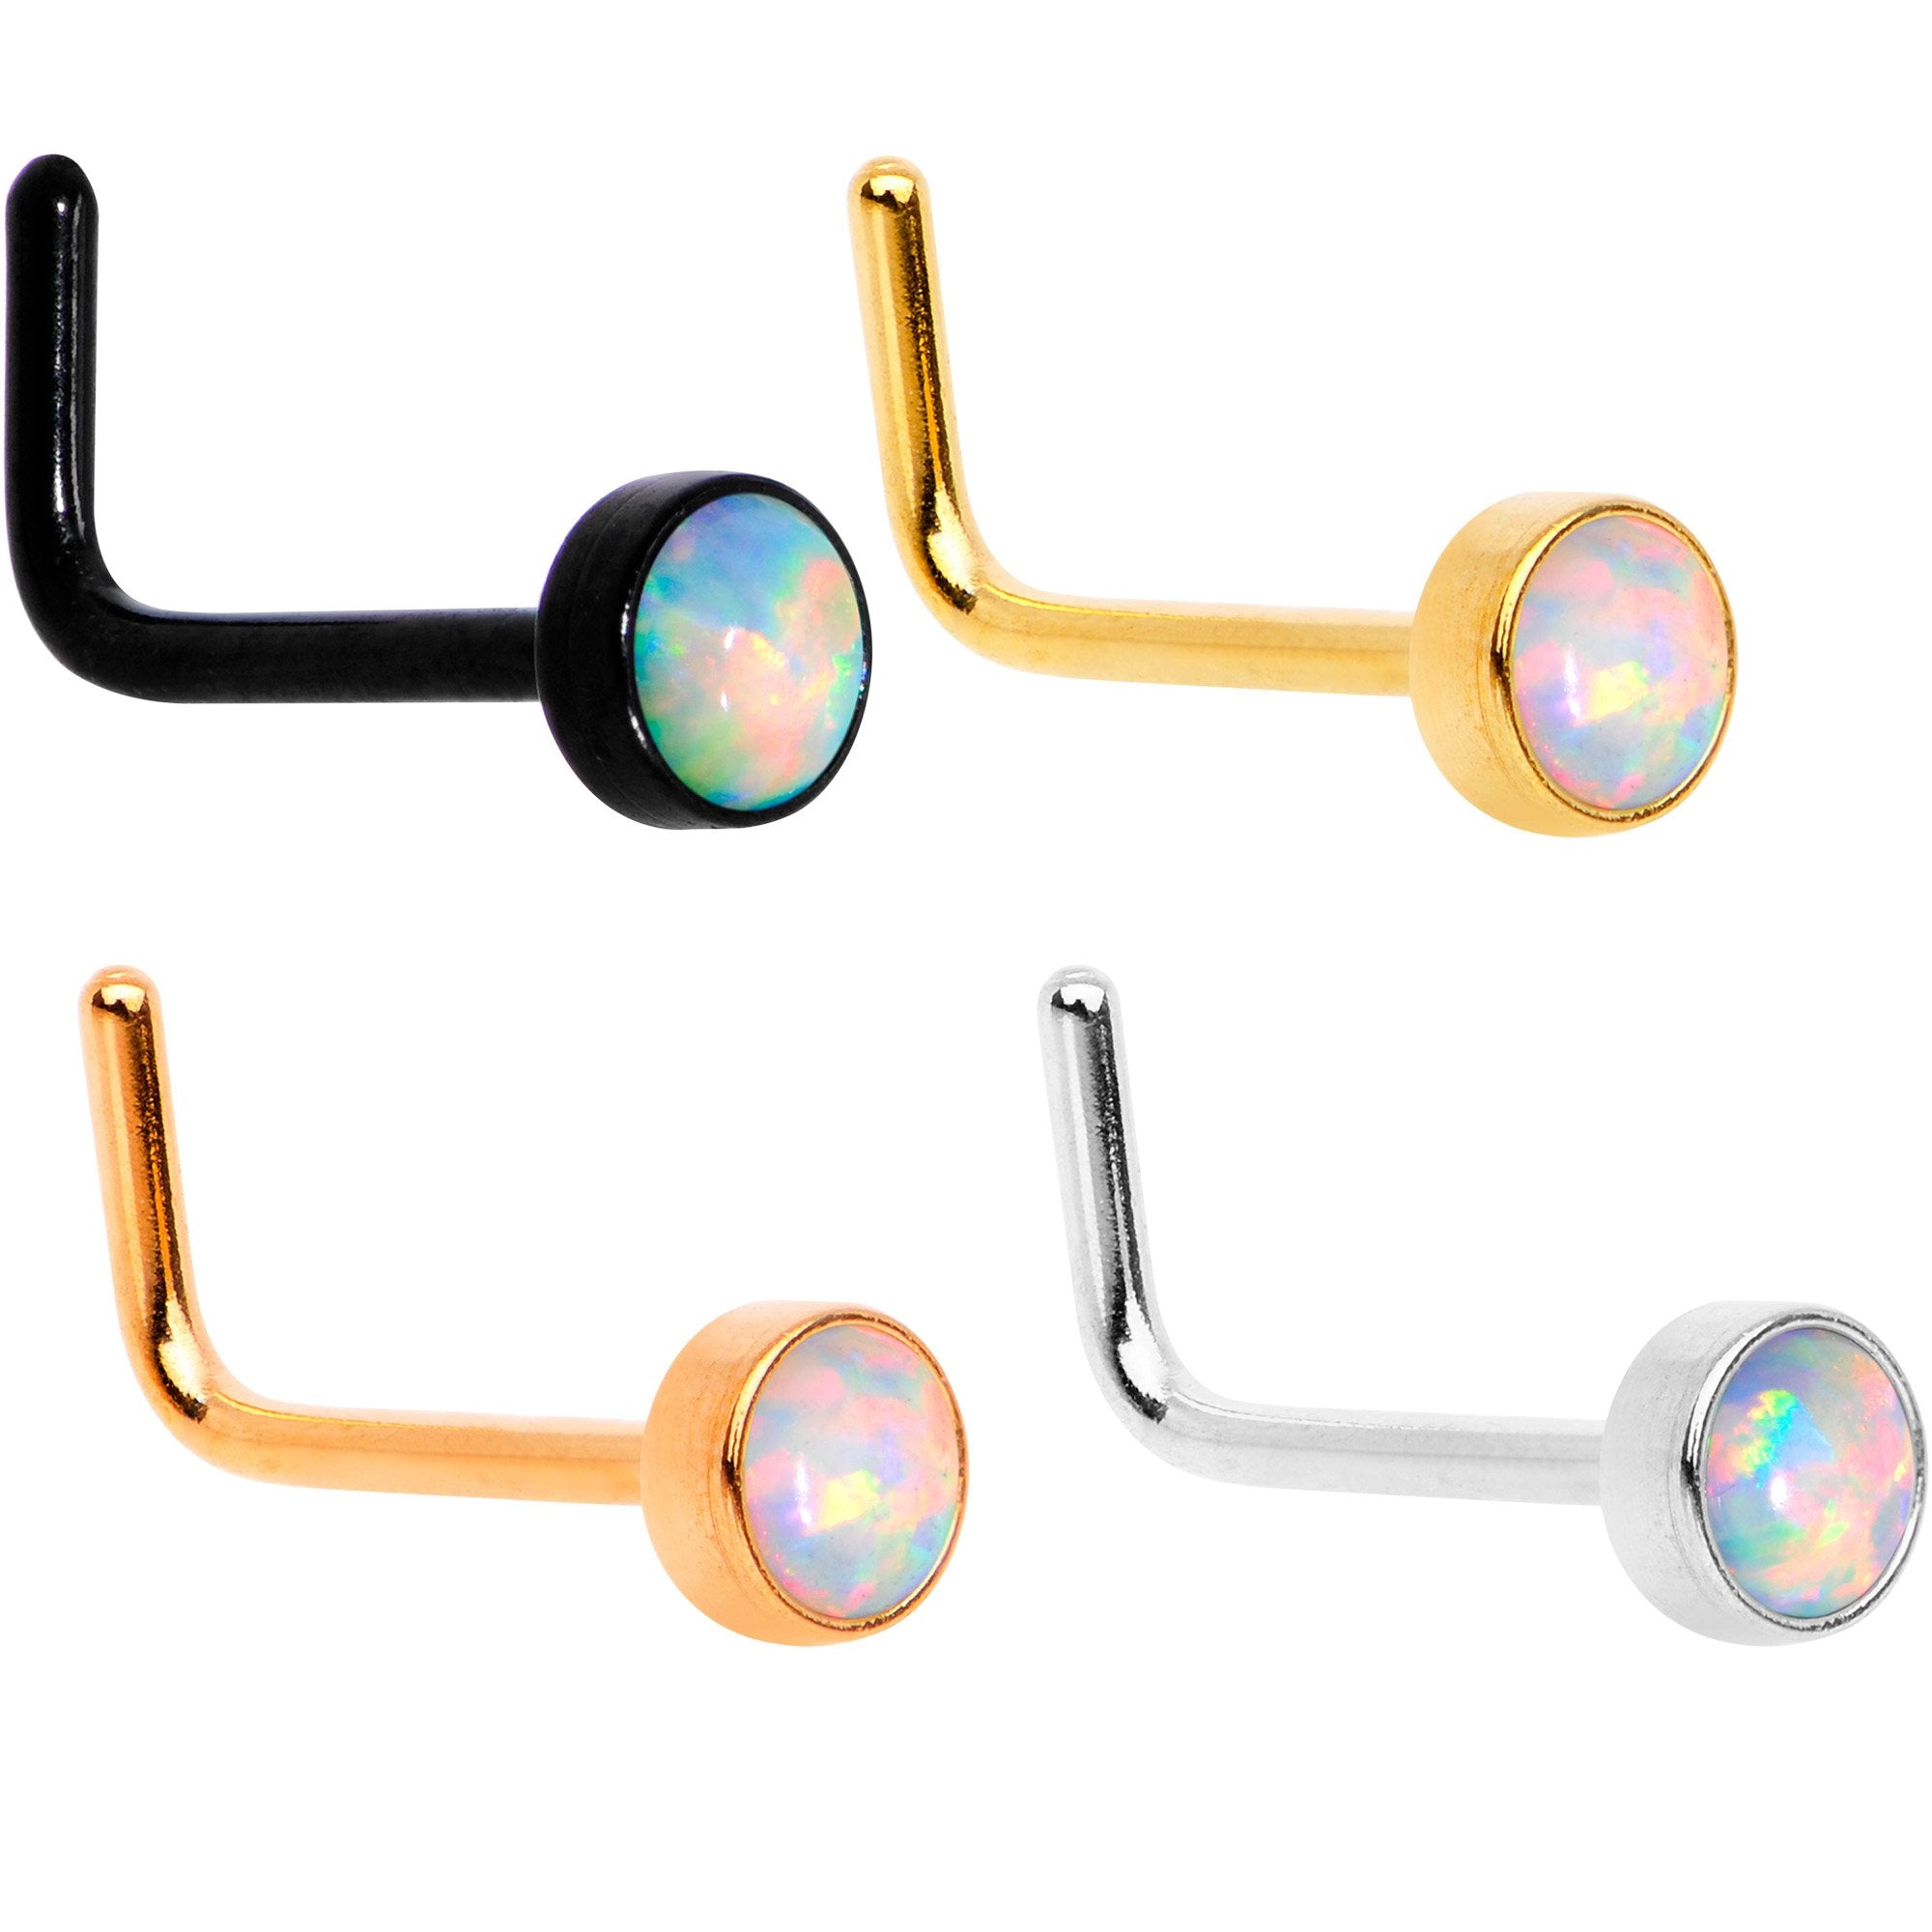 White 3mm Synthetic Opal Anodized Press Fit L Shaped Nose Ring 4 Pack Set